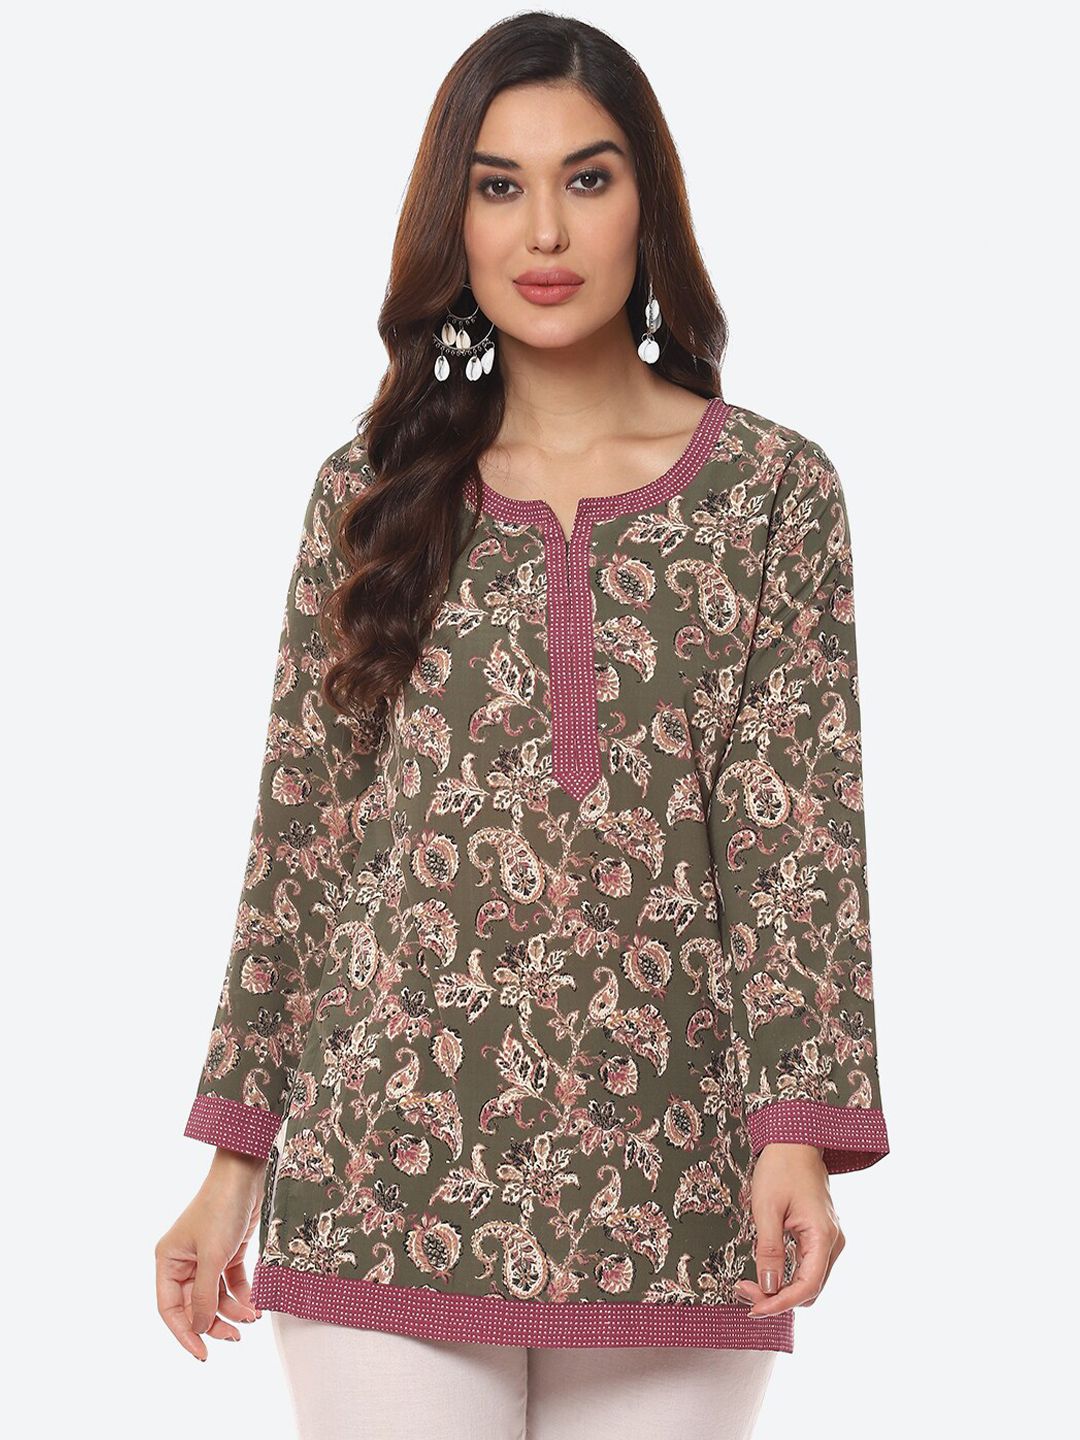 Biba Olive Green Floral Printed Straight Fit Kurti Price in India